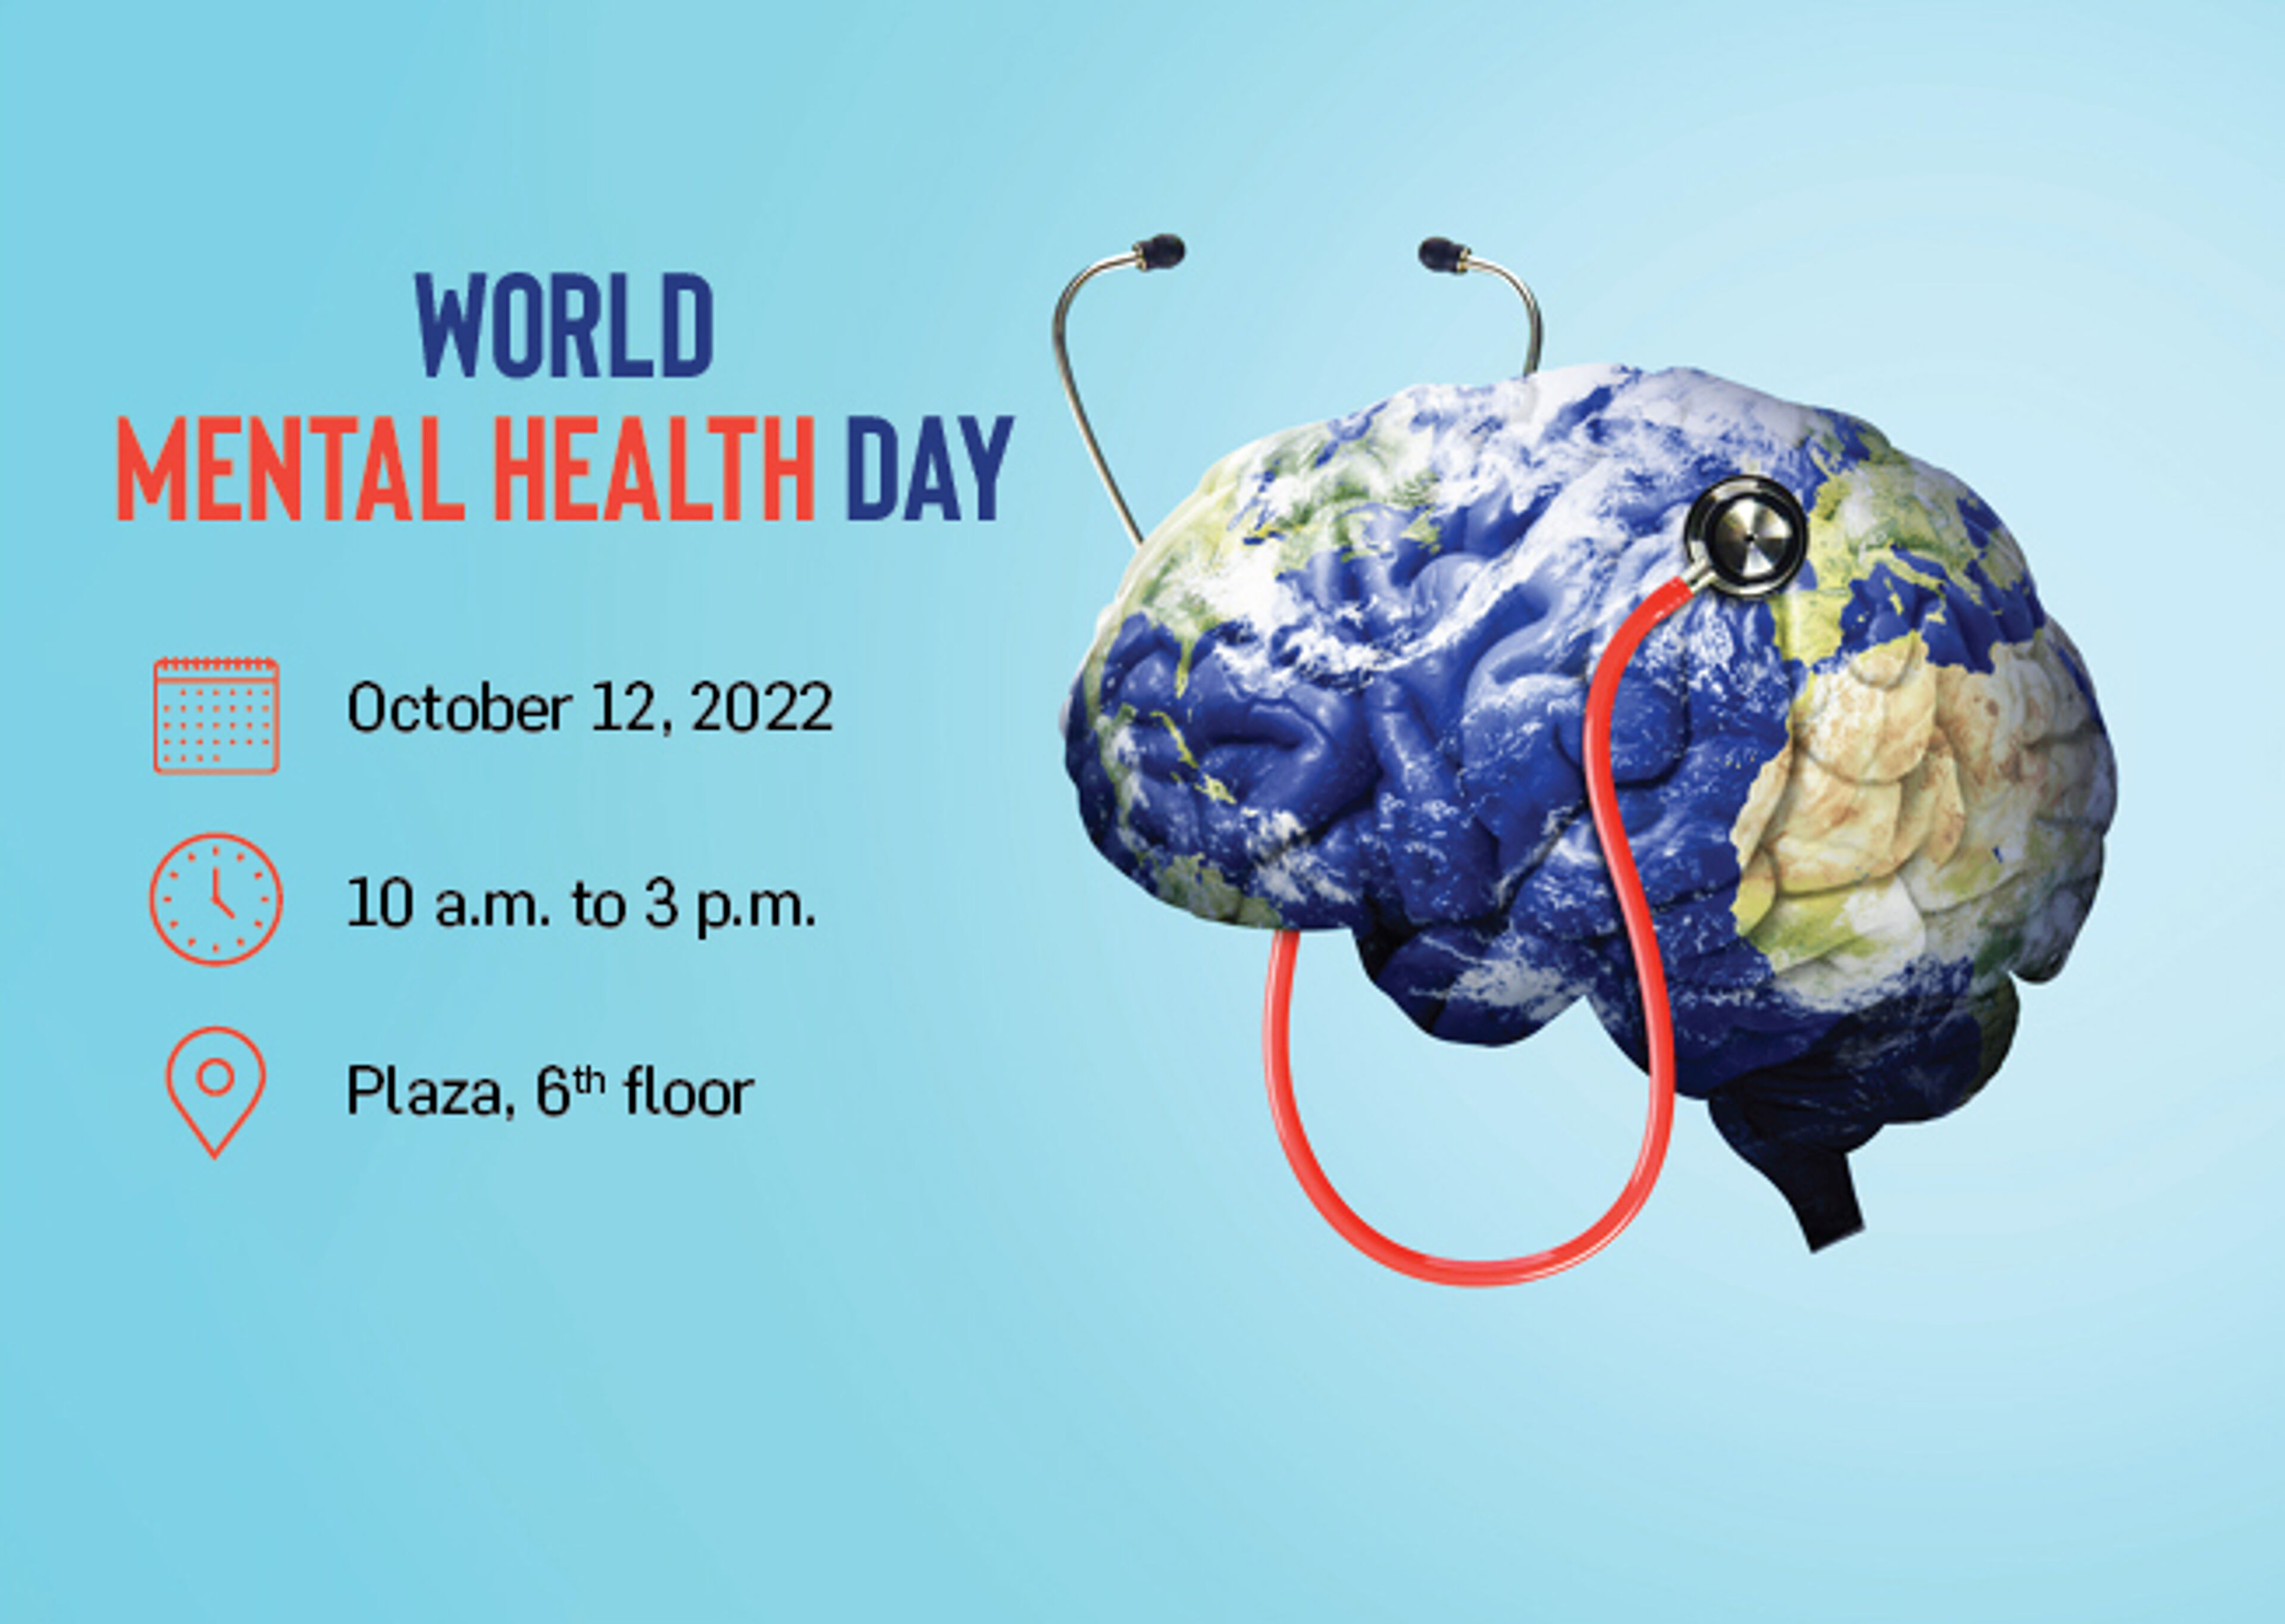 Poster for World Mental Health Day on October 12, 2022, featuring a globe with a stethoscope, from 10 a.m. to 3 p.m.